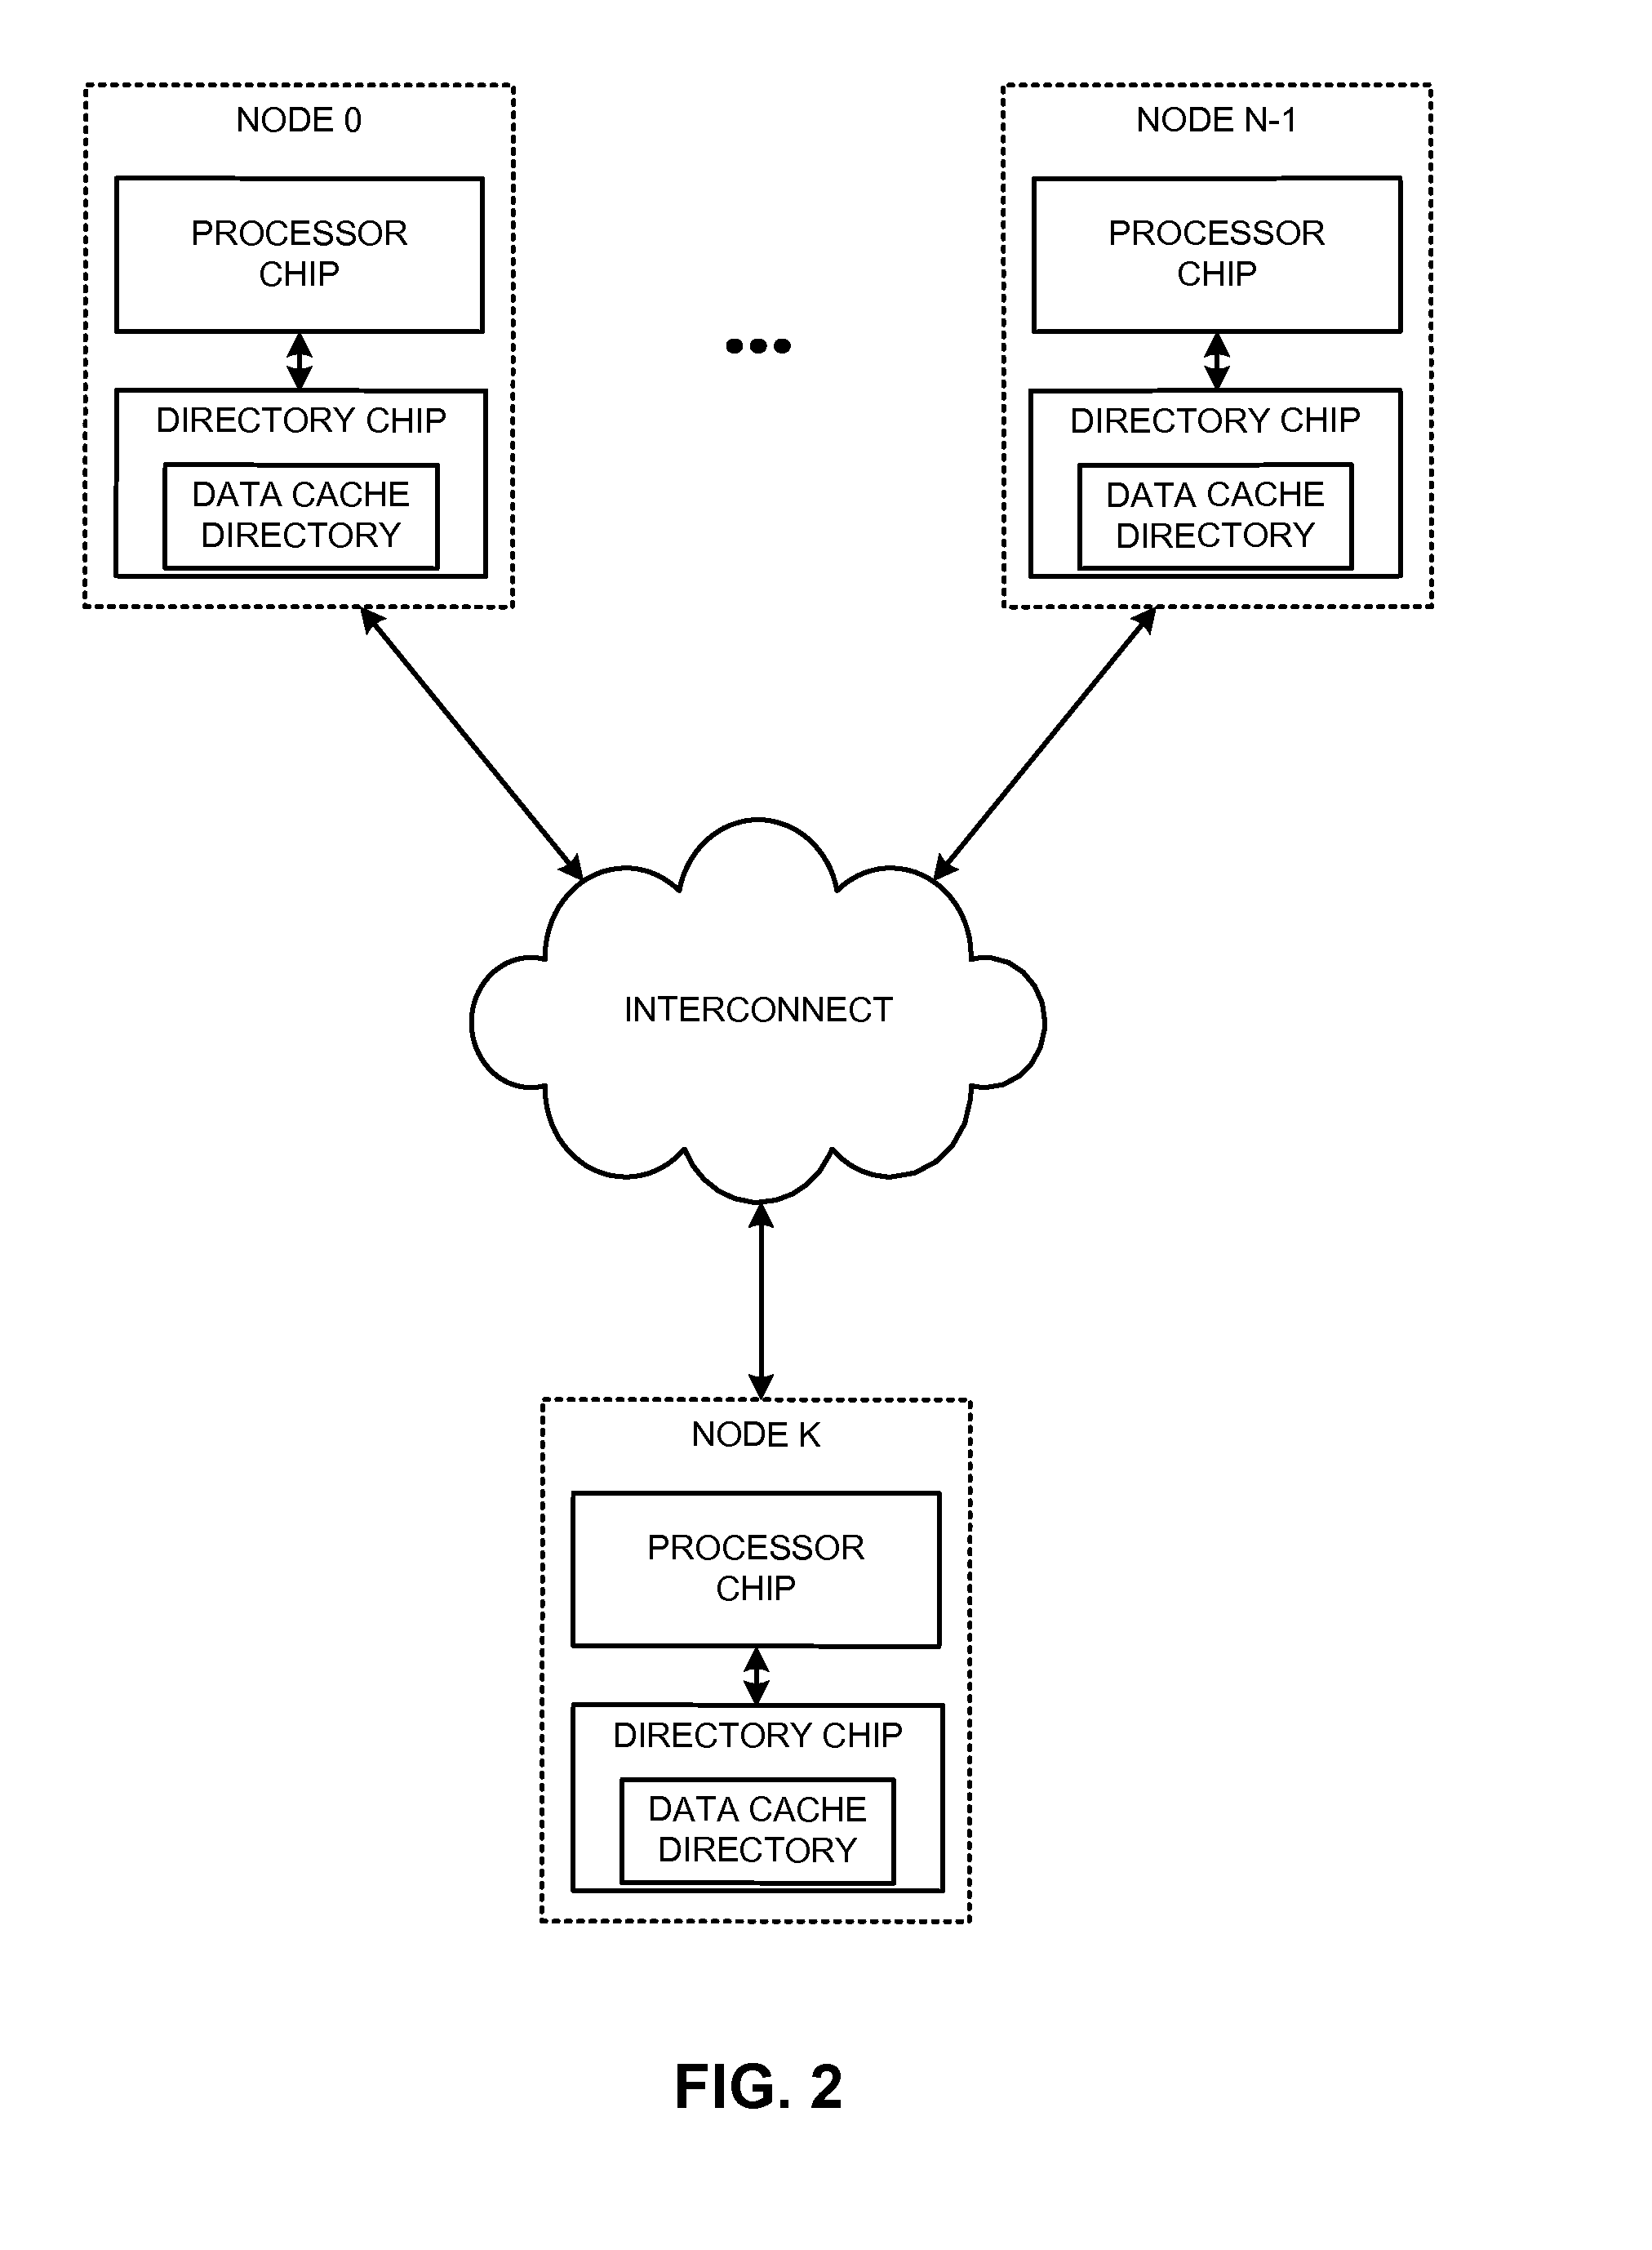 Using broadcast-based tlb sharing to reduce address-translation latency in a shared-memory system with electrical interconnect